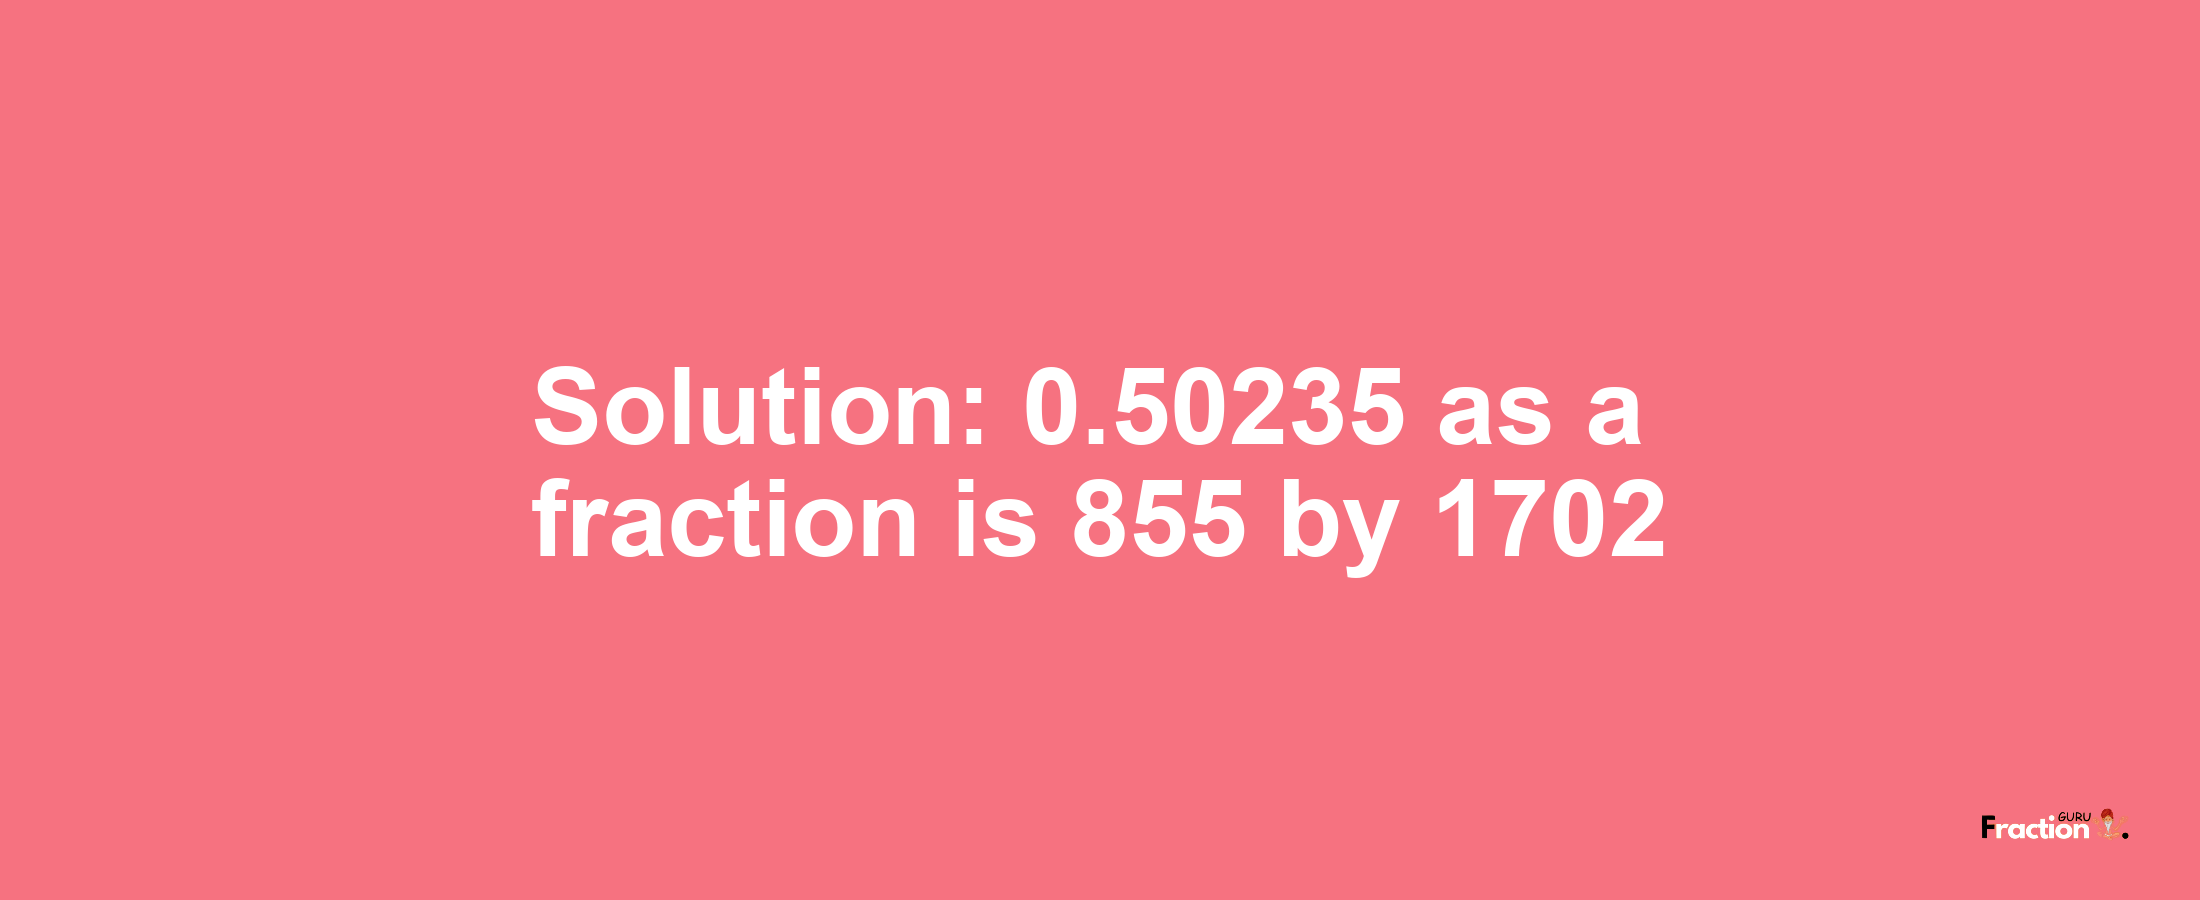 Solution:0.50235 as a fraction is 855/1702